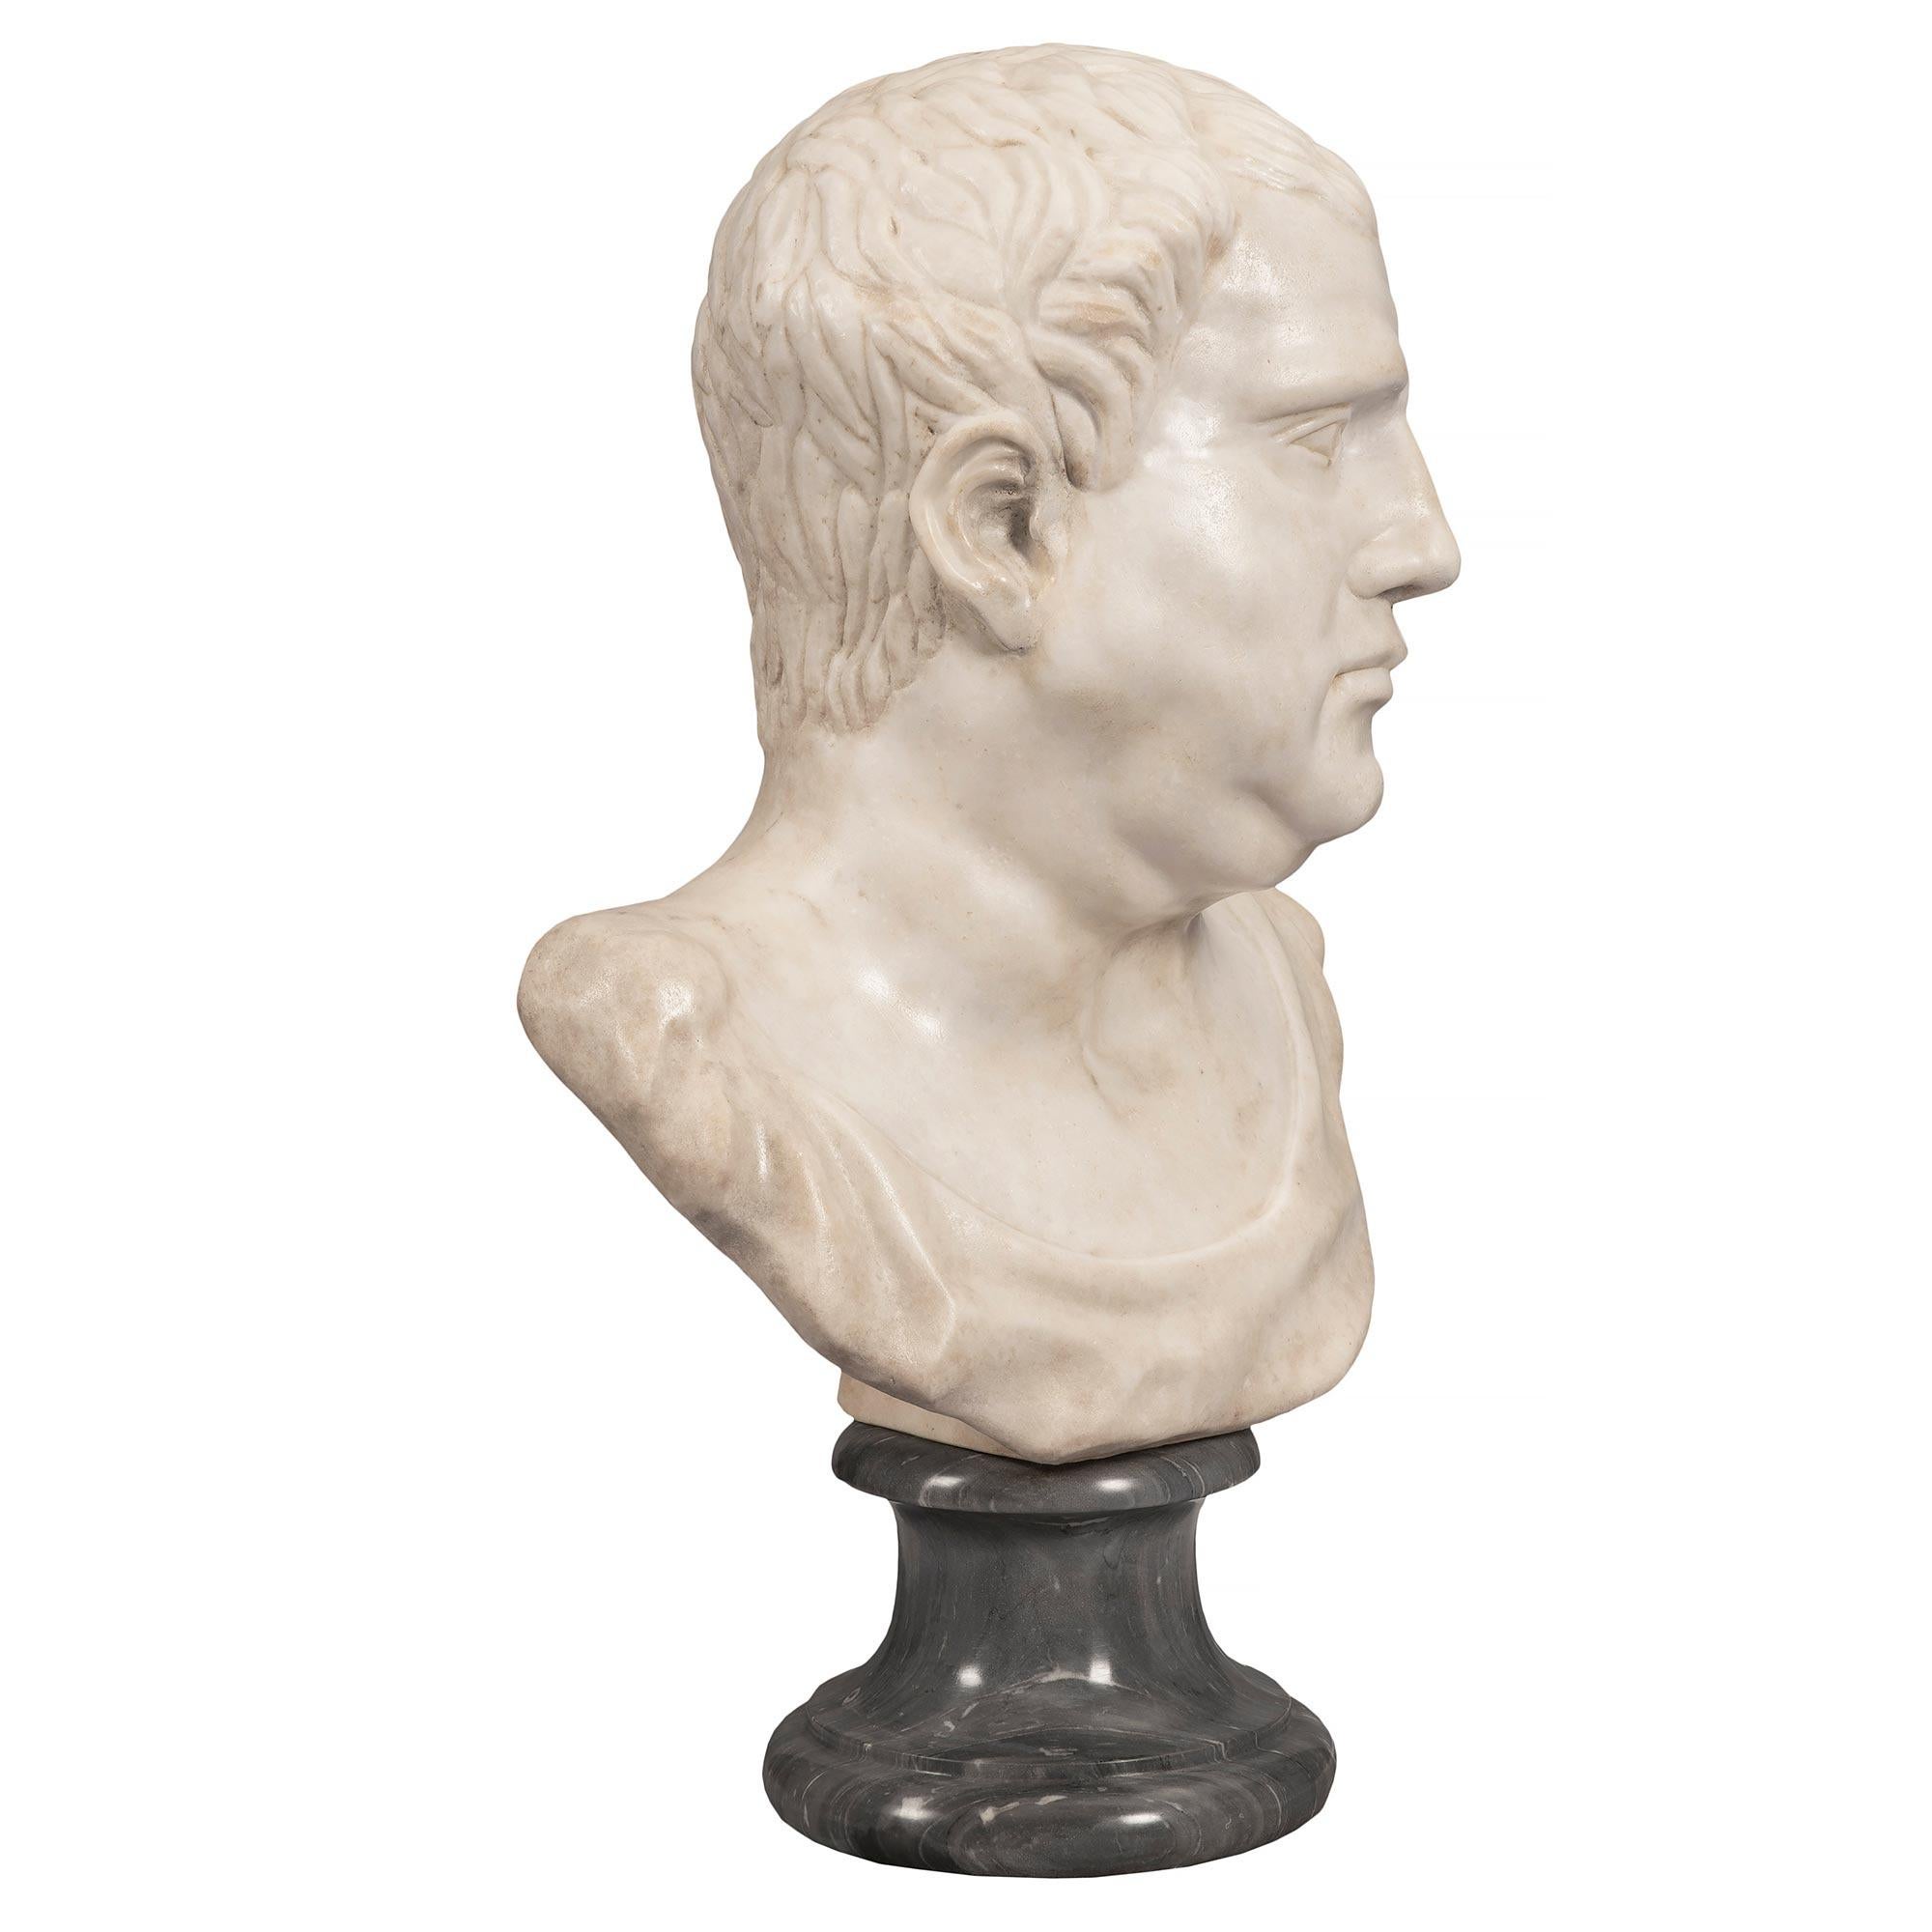 A handsome and high quality Italian early 19th century white Carrara marble bust of a Roman Emperor. The bust is raised by a circular Bleu Turquin marble base with a decorative mottled border. The masterfully sculpted bust of the man above displays